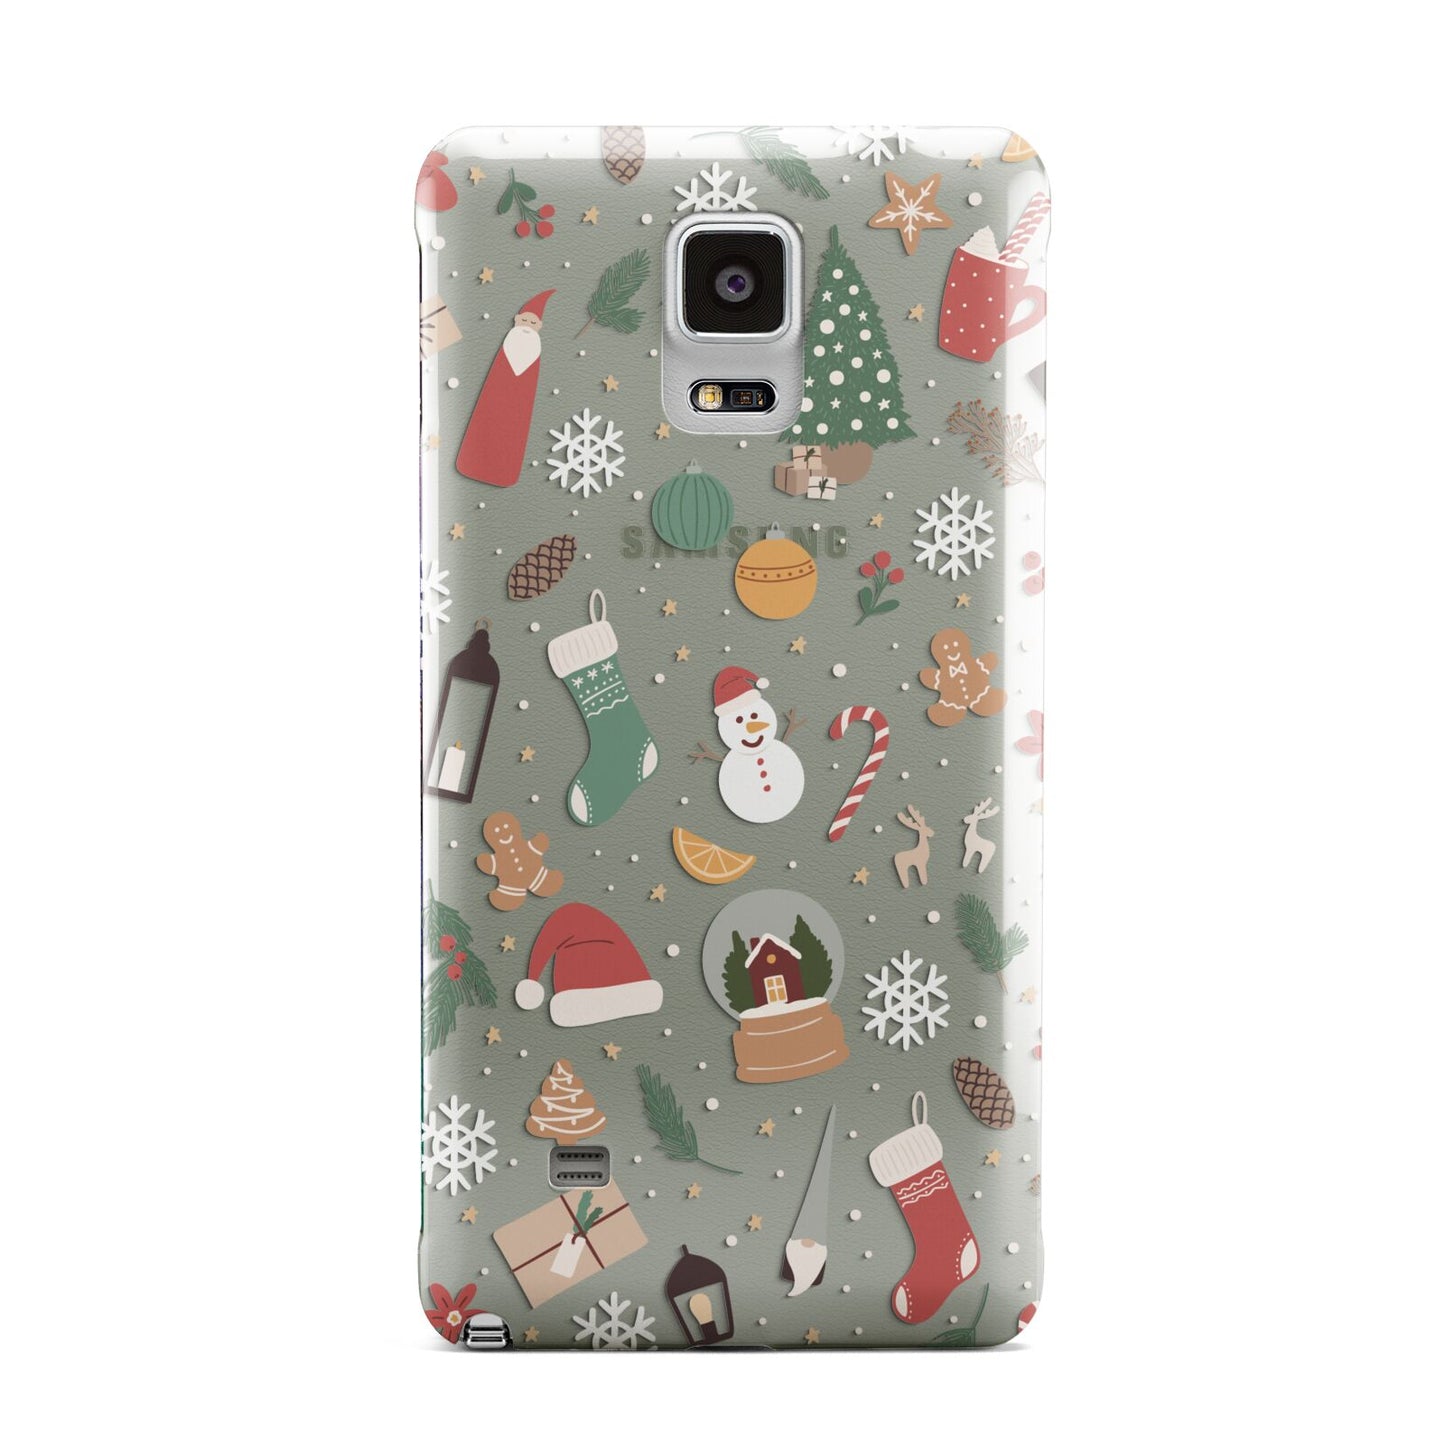 Christmas Assortments Samsung Galaxy Note 4 Case